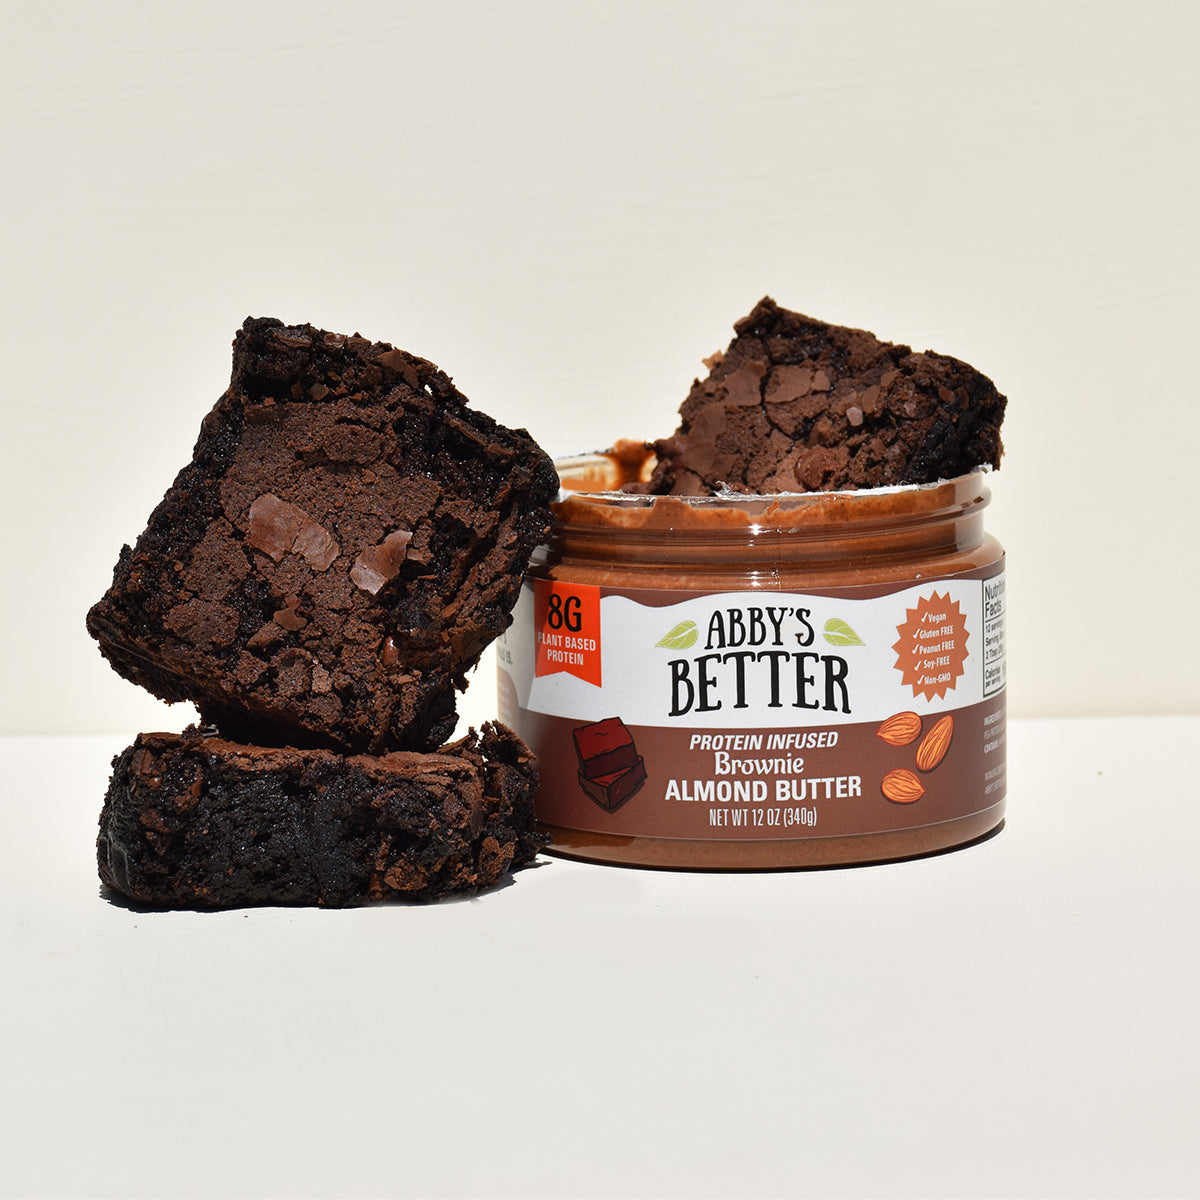 Brownie Protein Almond Butter – Abby's Better